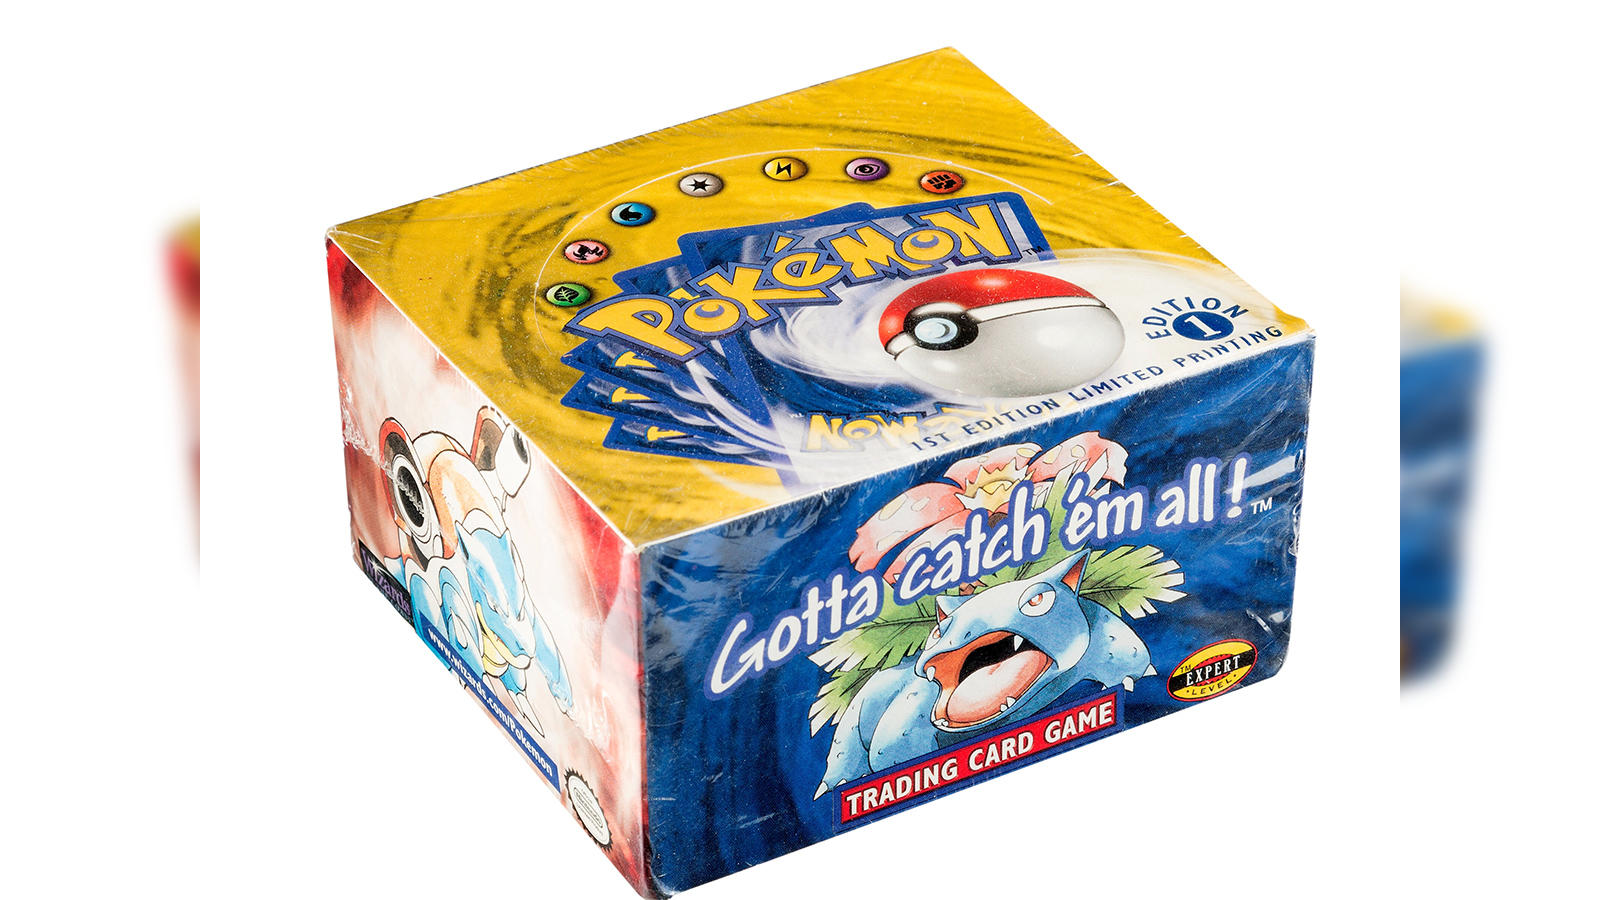 Gotta catch 'em all: Prices of Pokemon cards boom in pandemic